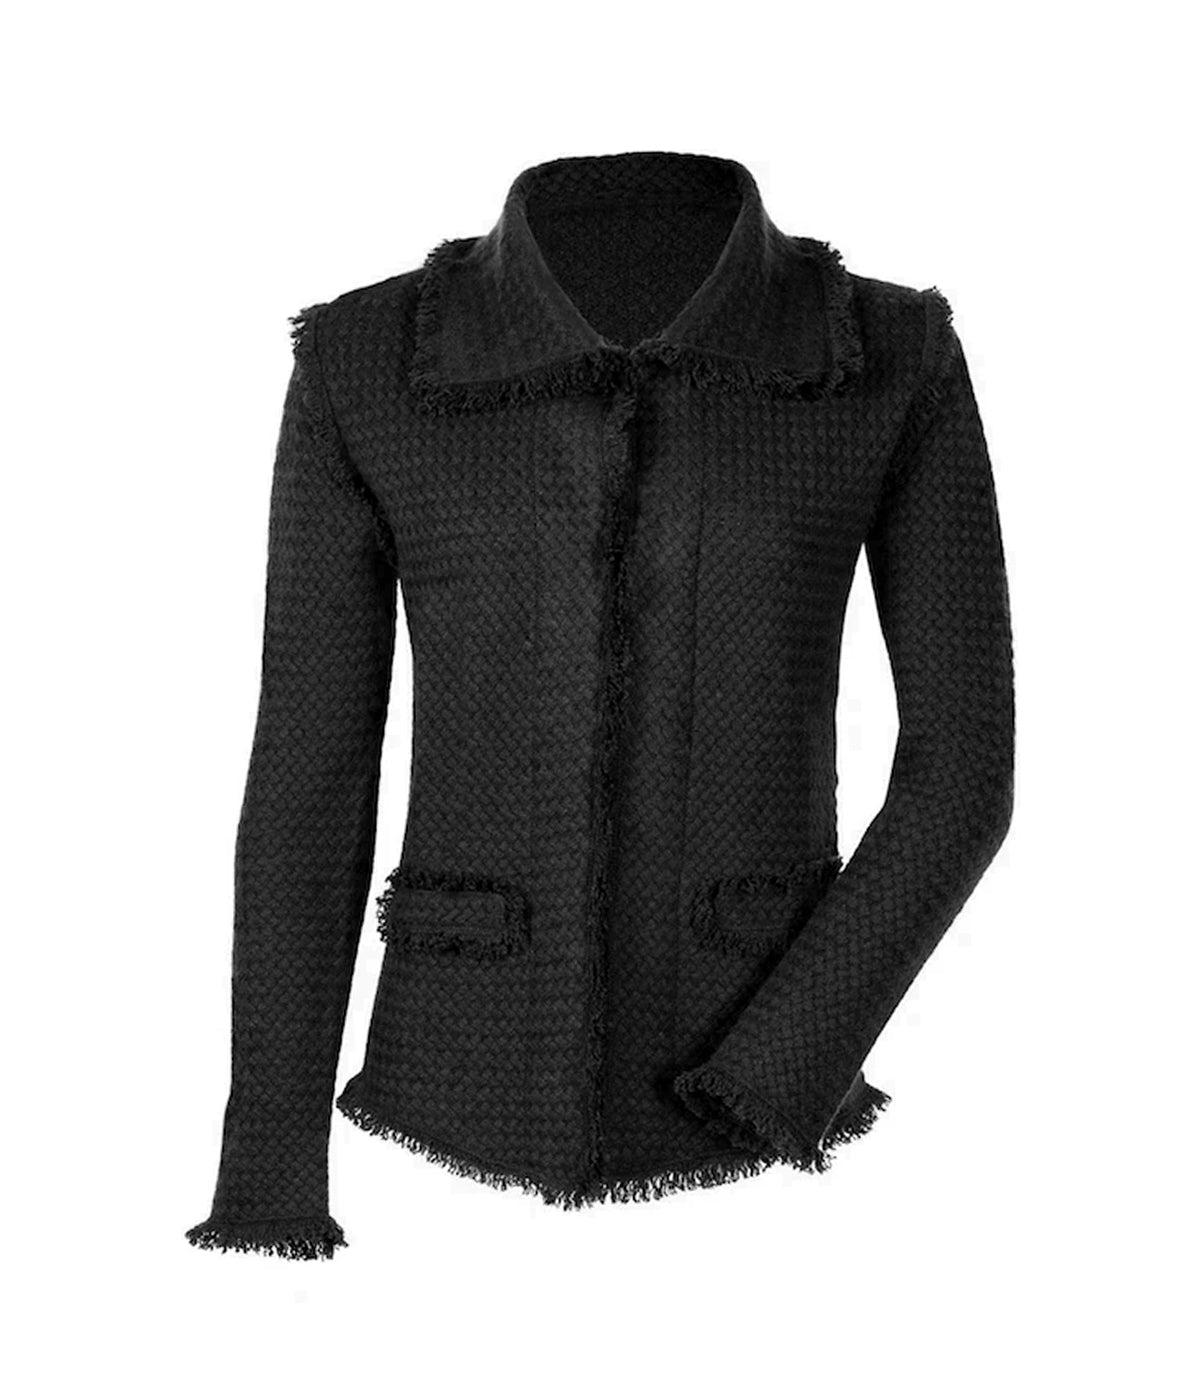 Classic Coco Jacket in Black